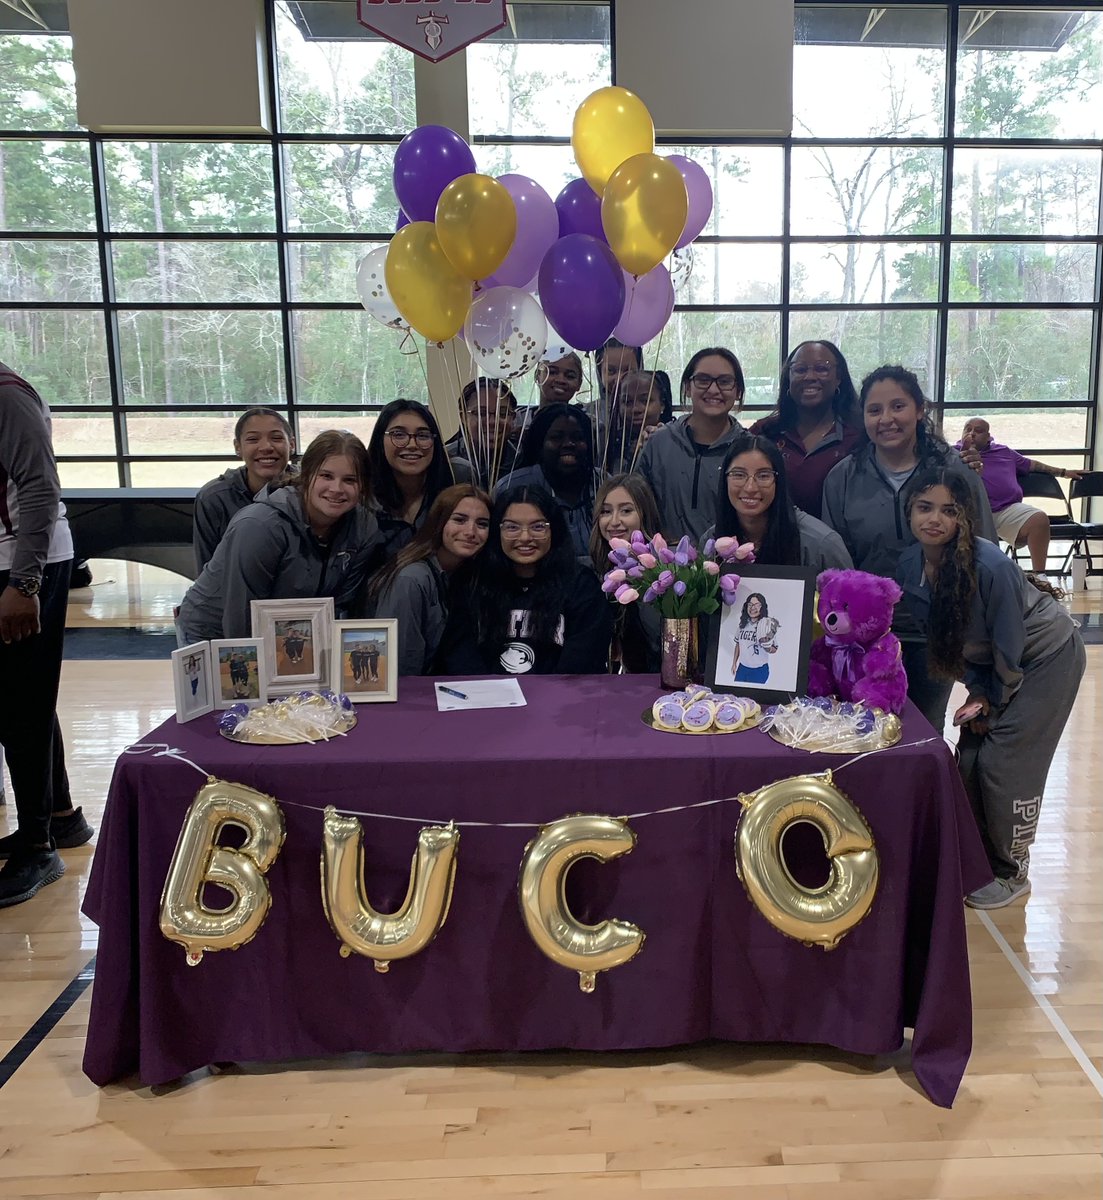 Signed, sealed, and delivered🖊️! Thank you to all who supported me throughout my journey! Can't wait to call this place home! 💛💜 #RoarGrizz🐻 @BUCOSoftball @bohanan25 @LSSS_Softball @LSSSTitans